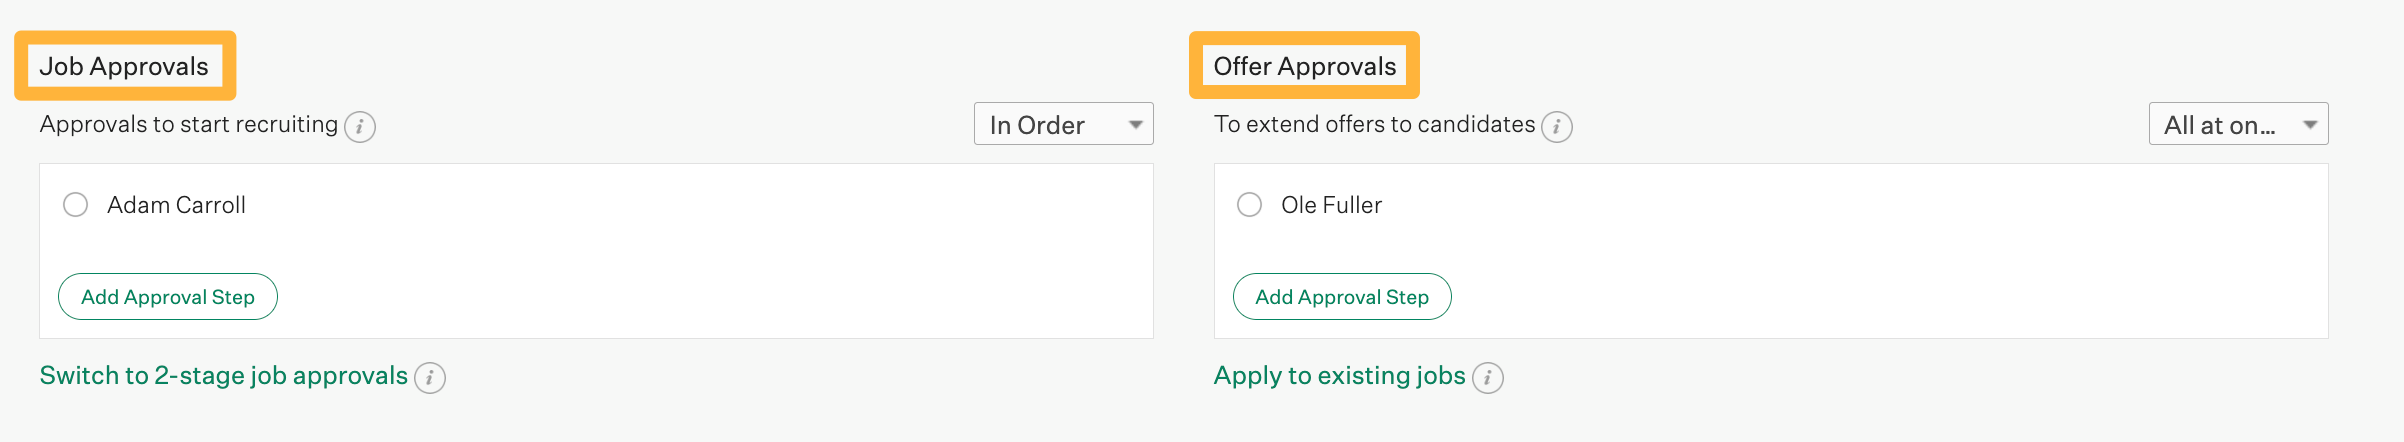 Approvals-page-with-the-job-approvals-section-and-offer-approvals-section-highlighted-separately.png